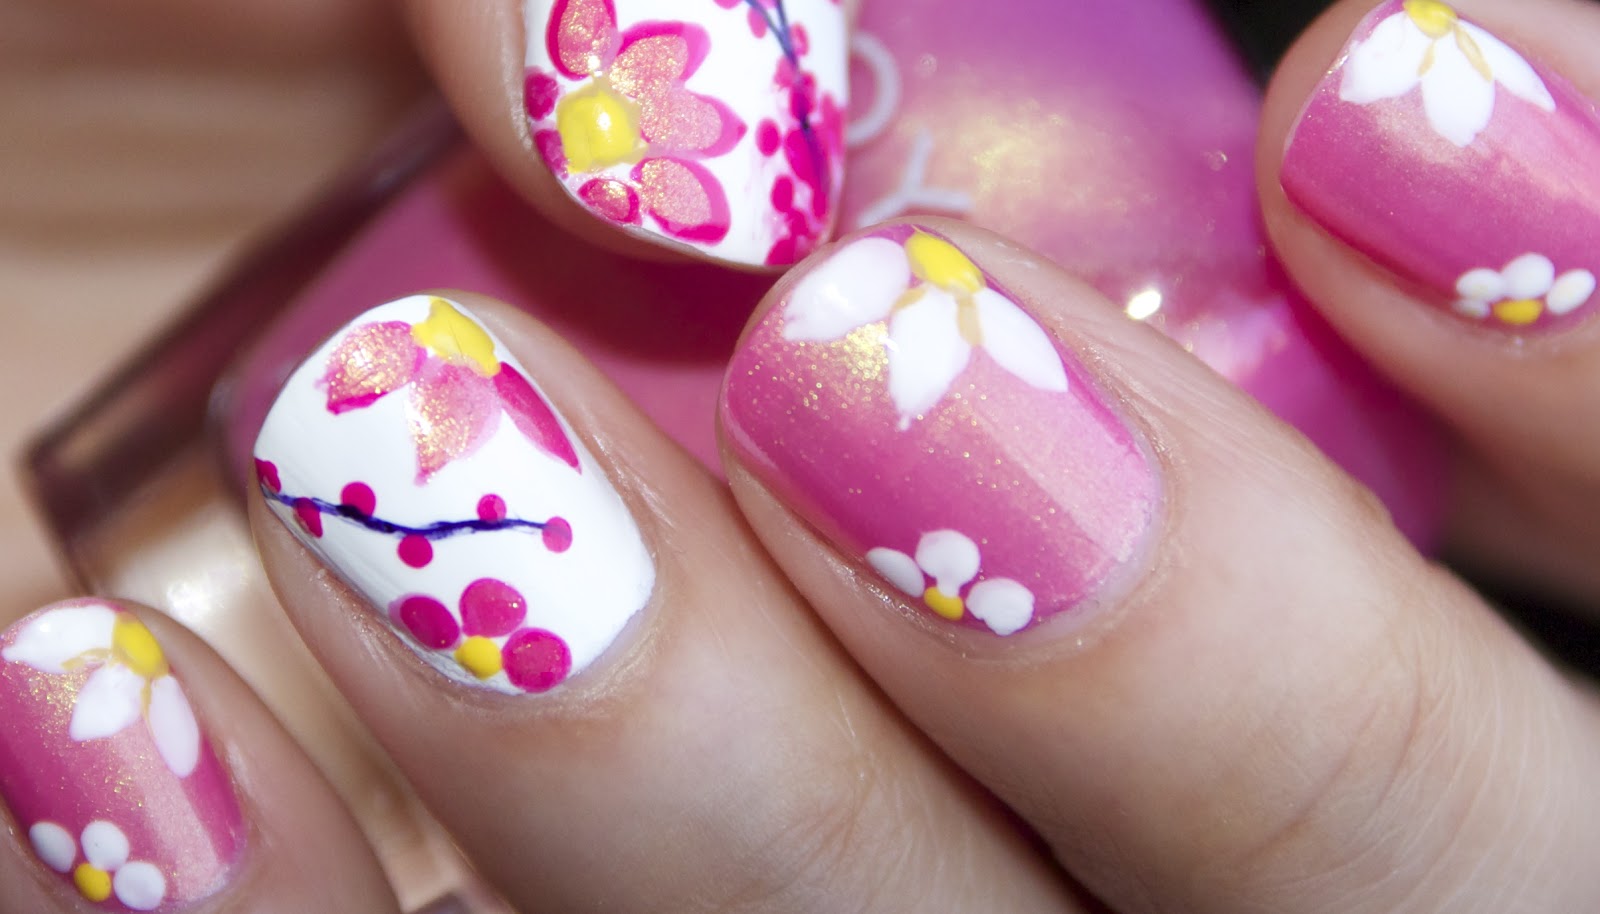 4. "Bee and Flower Nail Art Step by Step" - wide 4